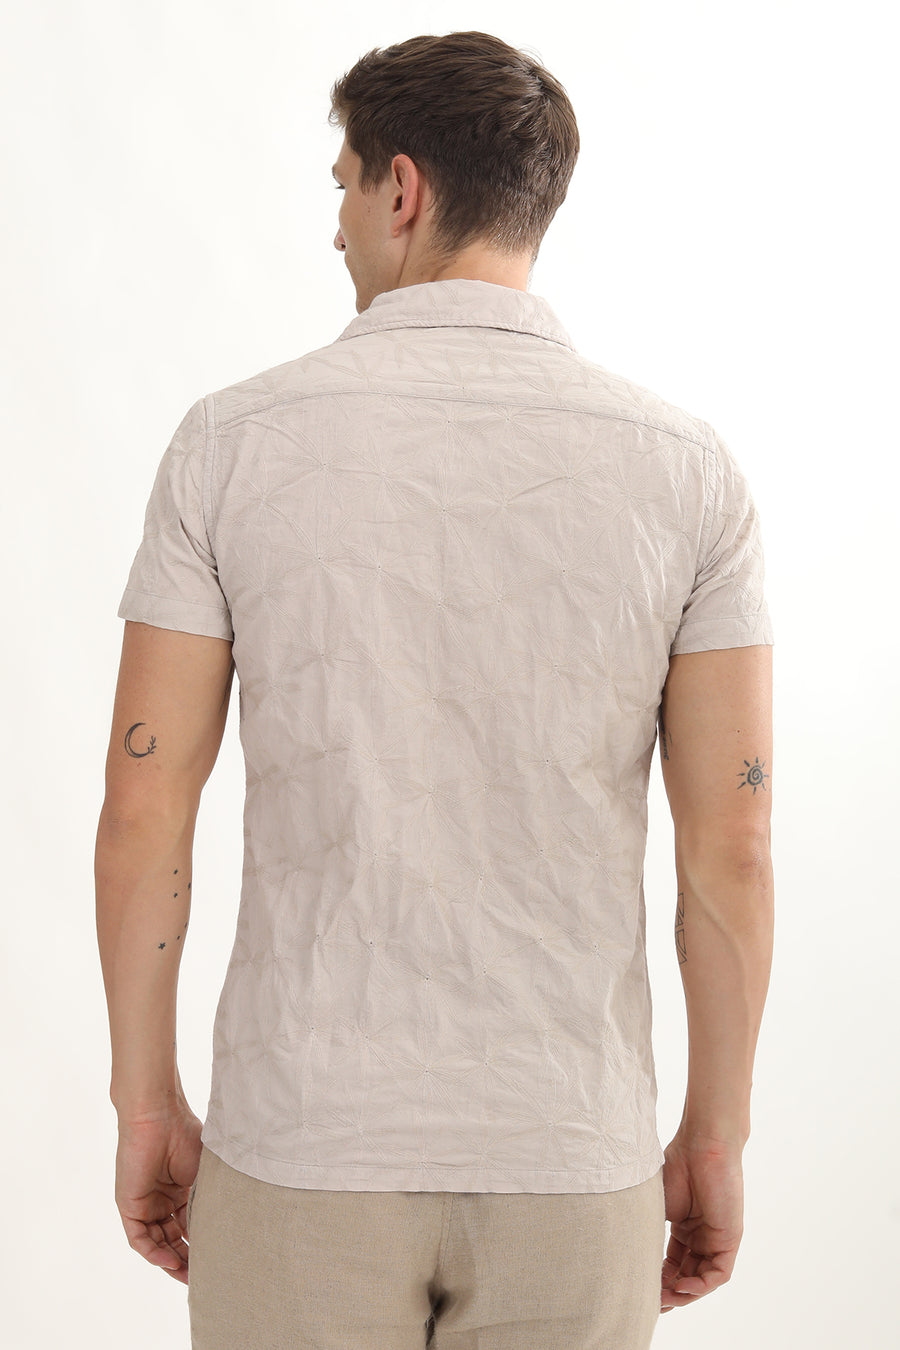 Flake - Dyed Embroidered Shirt - Beige